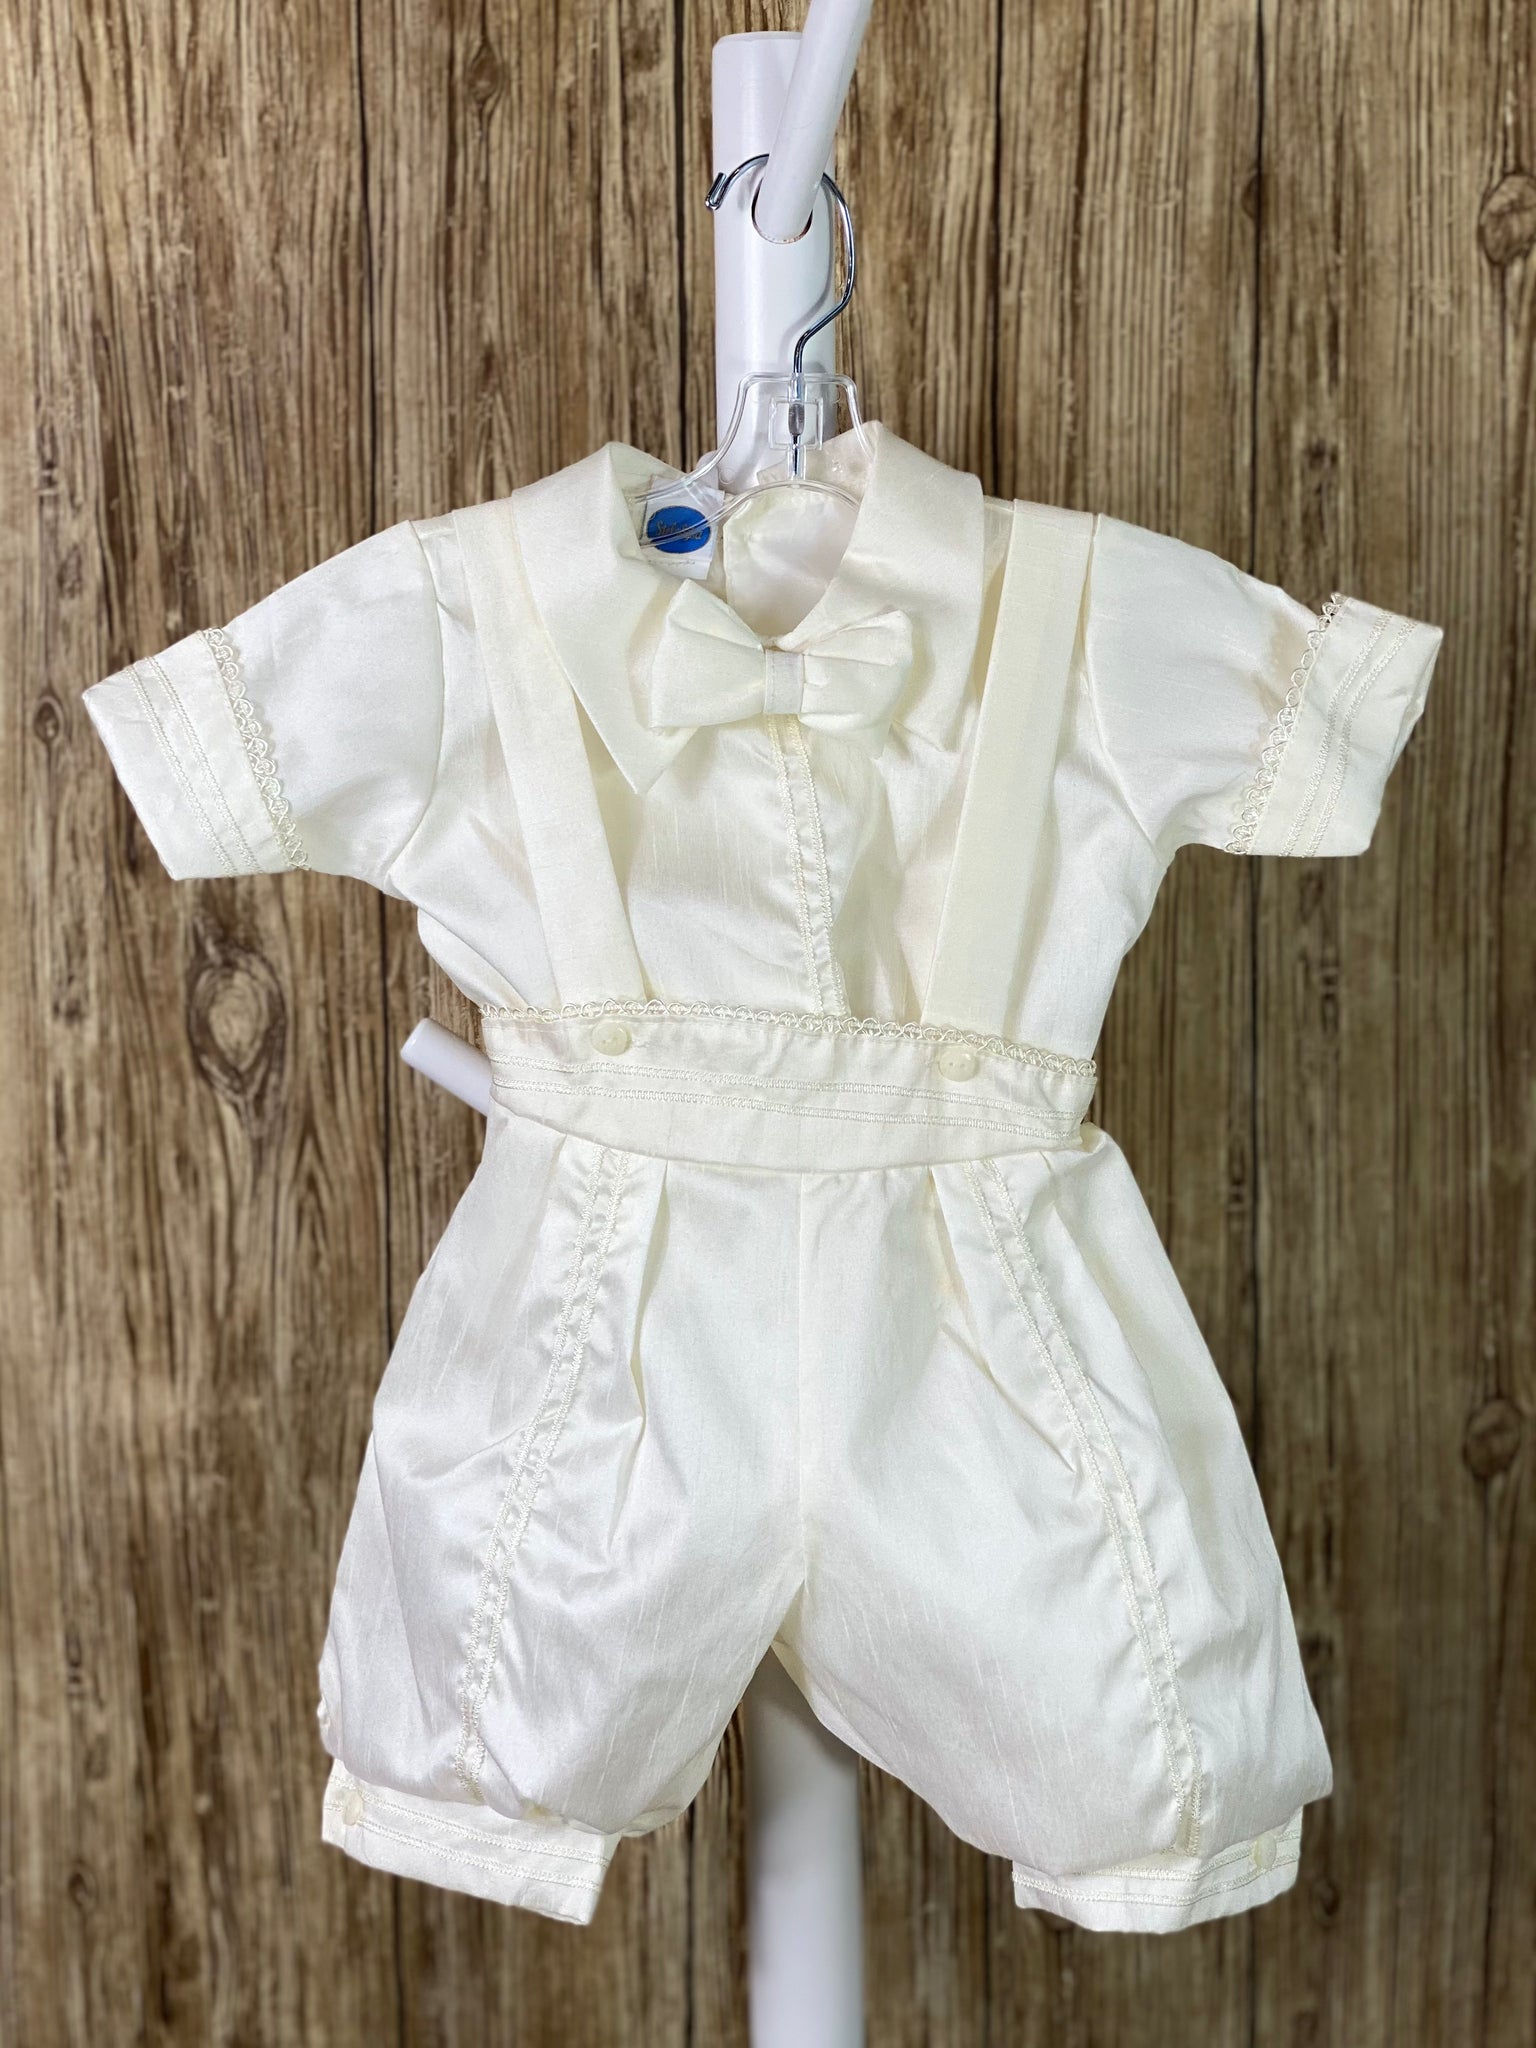 This a beautiful, one-of-a-kind boy’s baptism gown/set.  Lovely clothes for a precious child.   IVORY   4-piece white set including beret, vest, shirt, suspender pants JHS symbol embroidered into vest (JHS stands for Jesus Holmium Salvatore, Latin for Jesus Savior of Mankind) Tassel pin with 3 rhinestone centered circles Thin trim along cuffs, beret, and up pant legs Collared shirt with short sleeves Buttoning on pant cuffs Elastic banding behind pants Button closure on back of shirt